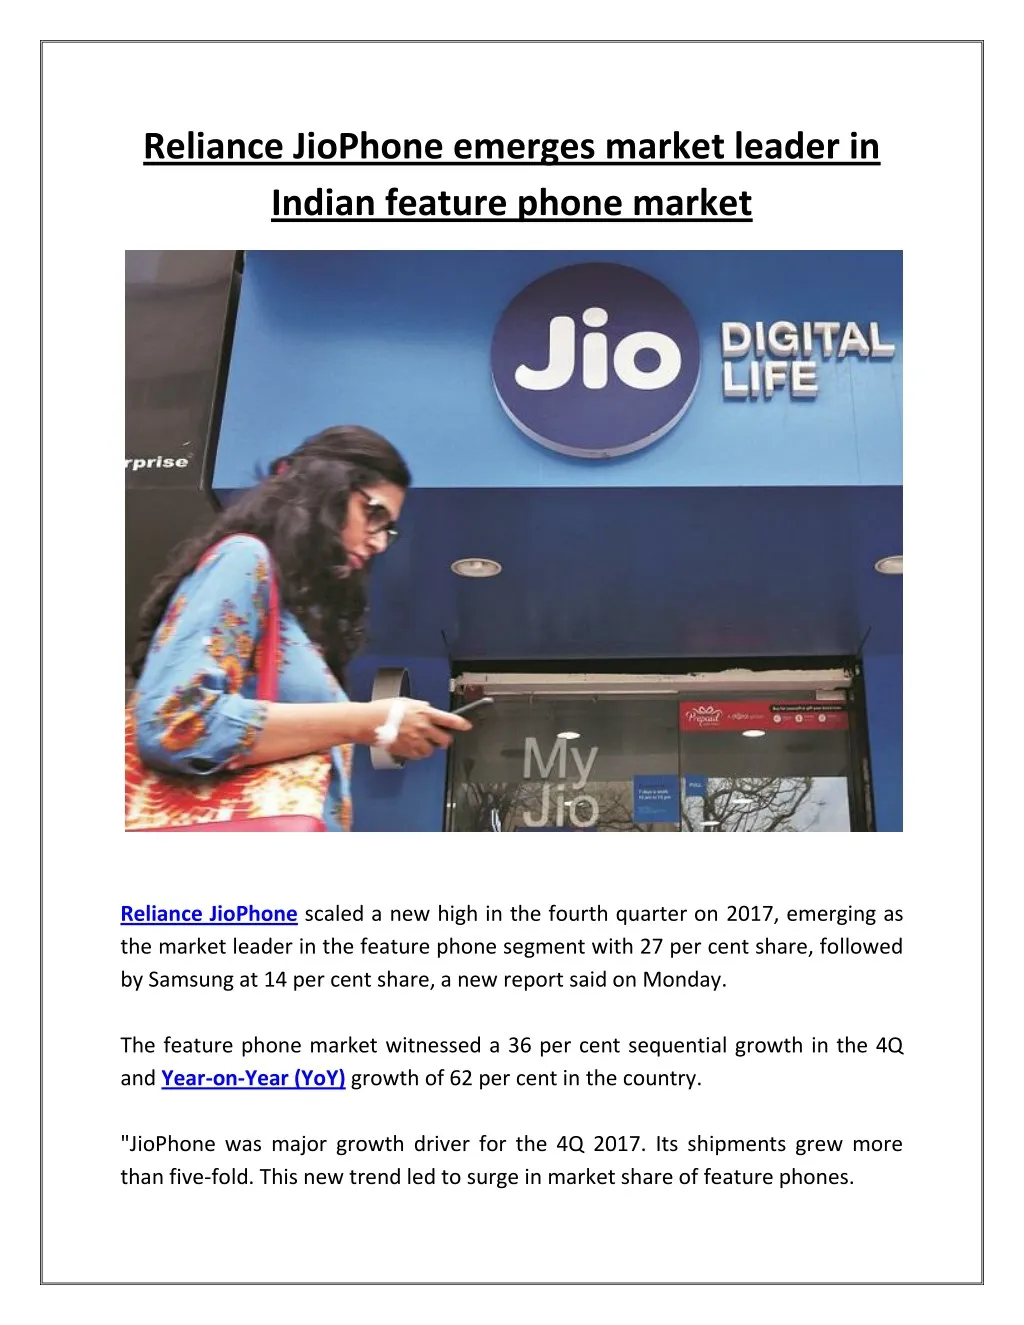 reliance jiophone emerges market leader in indian